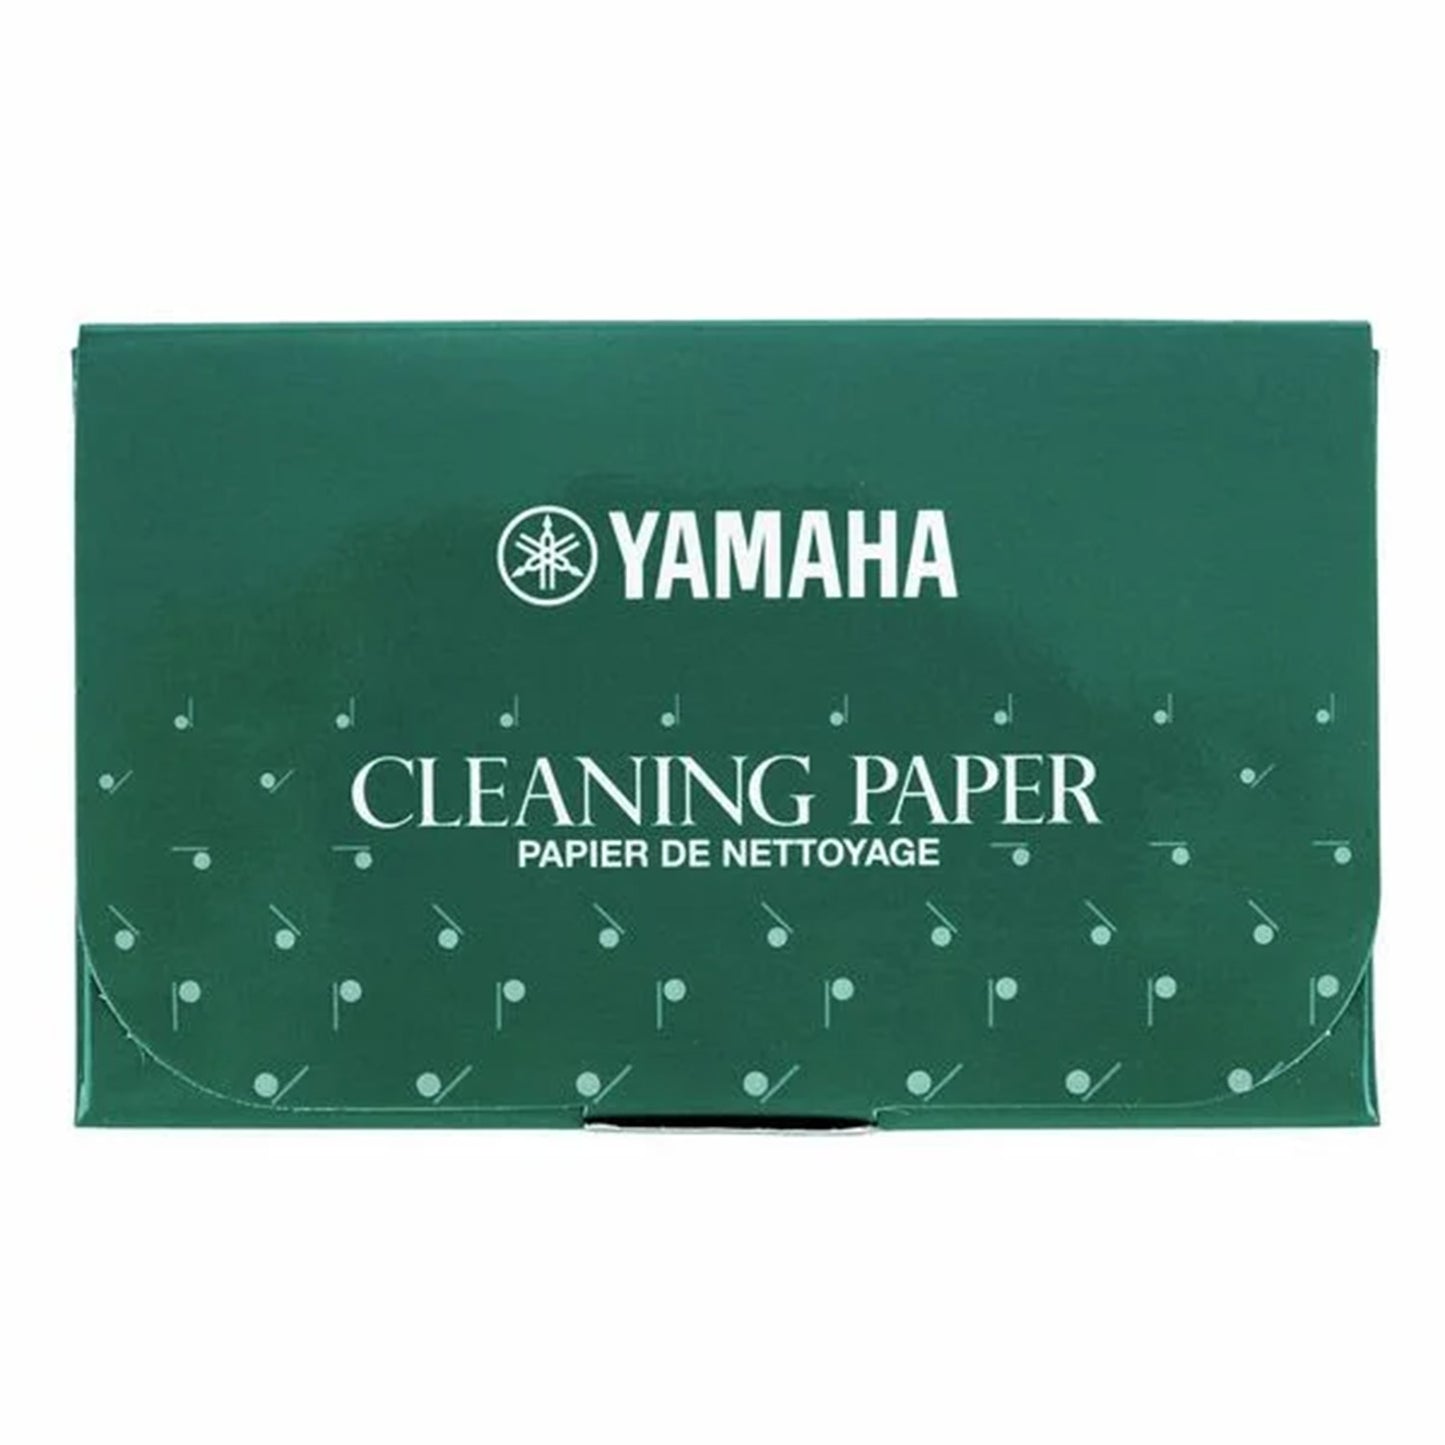 closeup of closed Yamaha cleaning paper box, green against white background